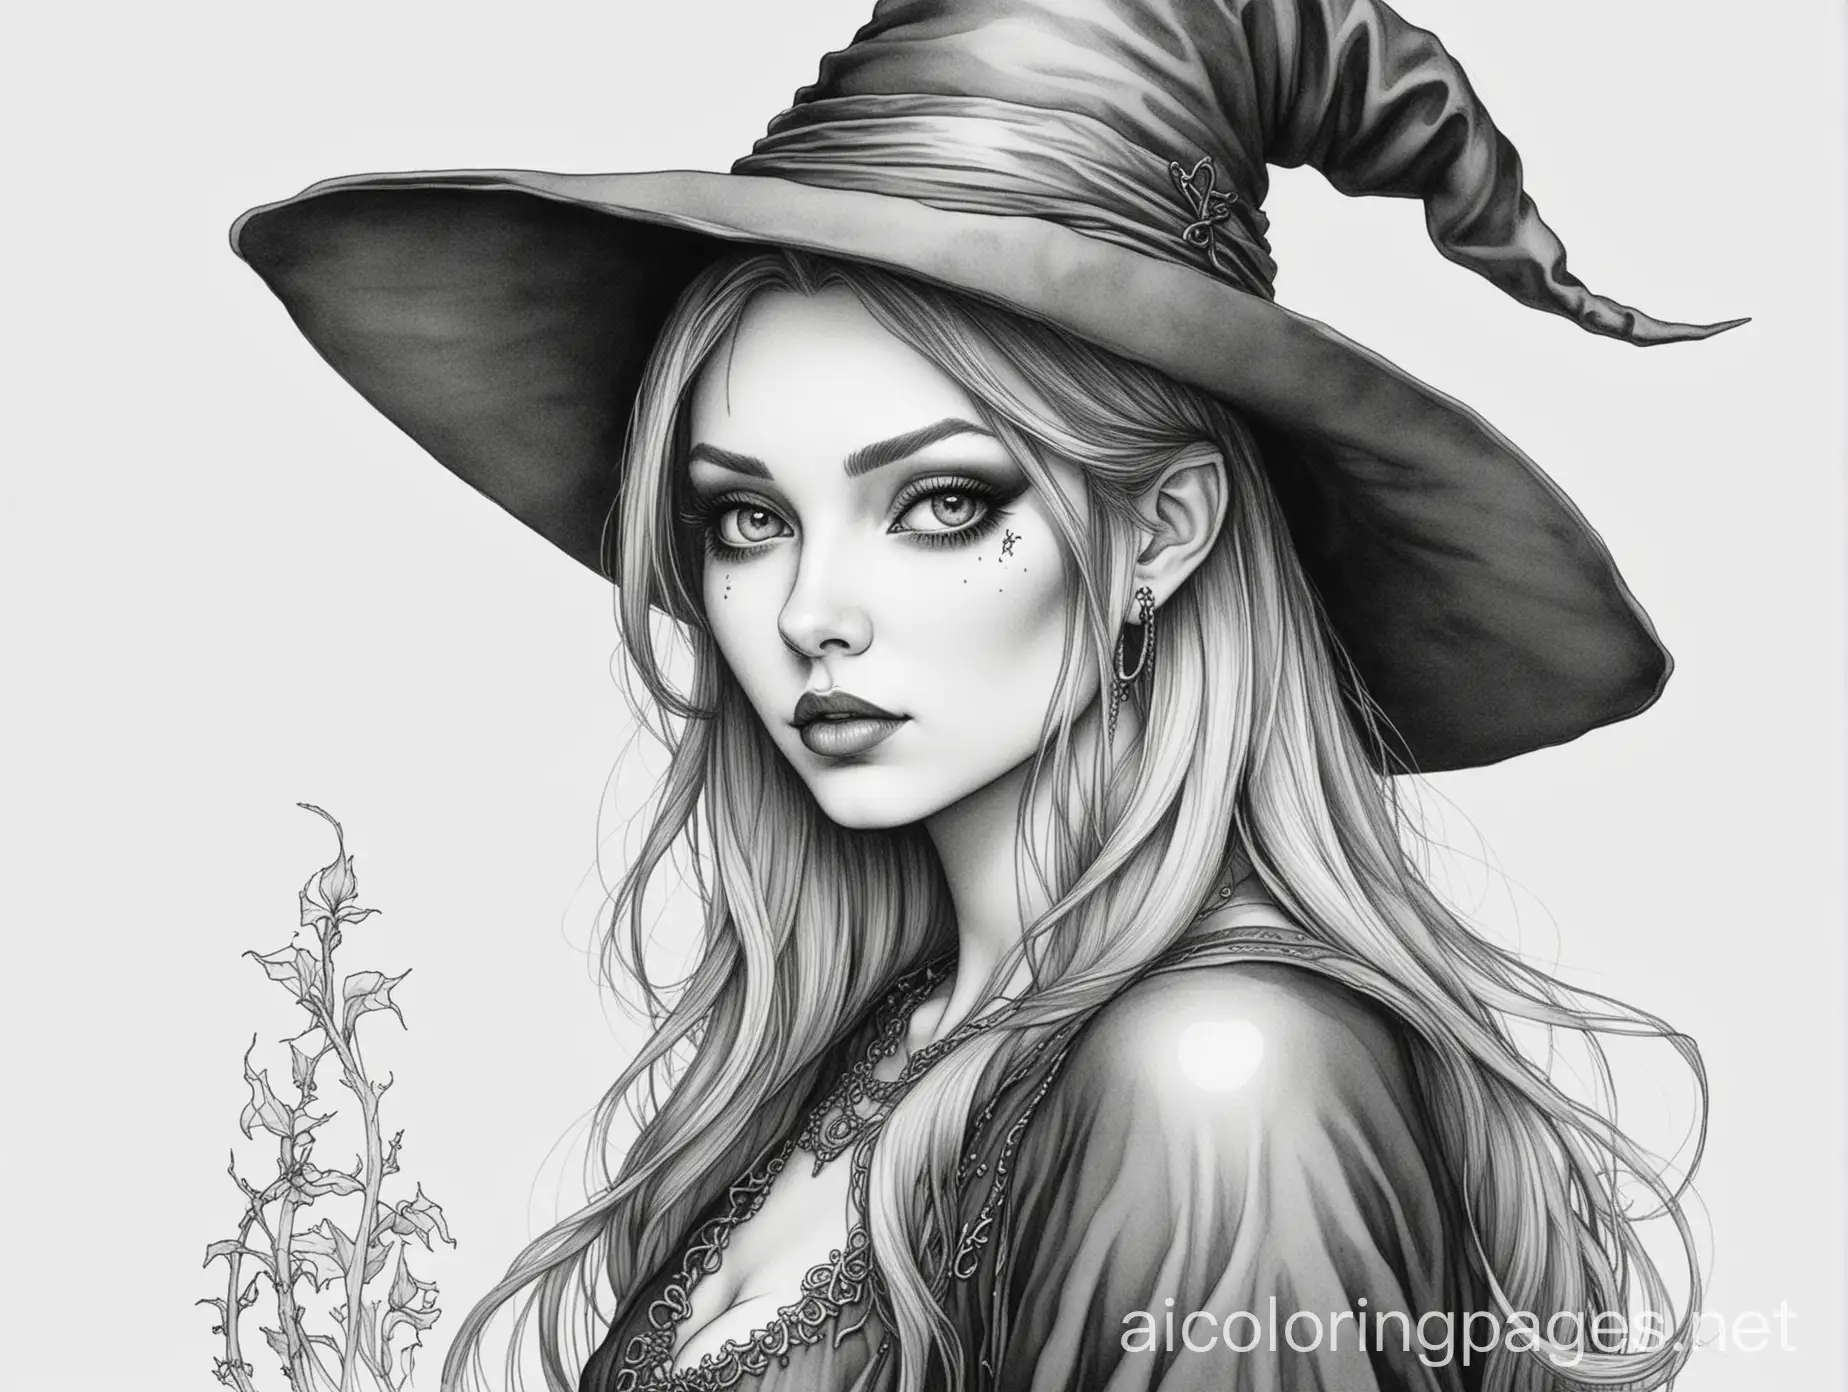 Gothic witch, Coloring Page, black and white, line art, white background, Simplicity, Ample White Space. The background of the coloring page is plain white to make it easy for young children to color within the lines. The outlines of all the subjects are easy to distinguish, making it simple for kids to color without too much difficulty